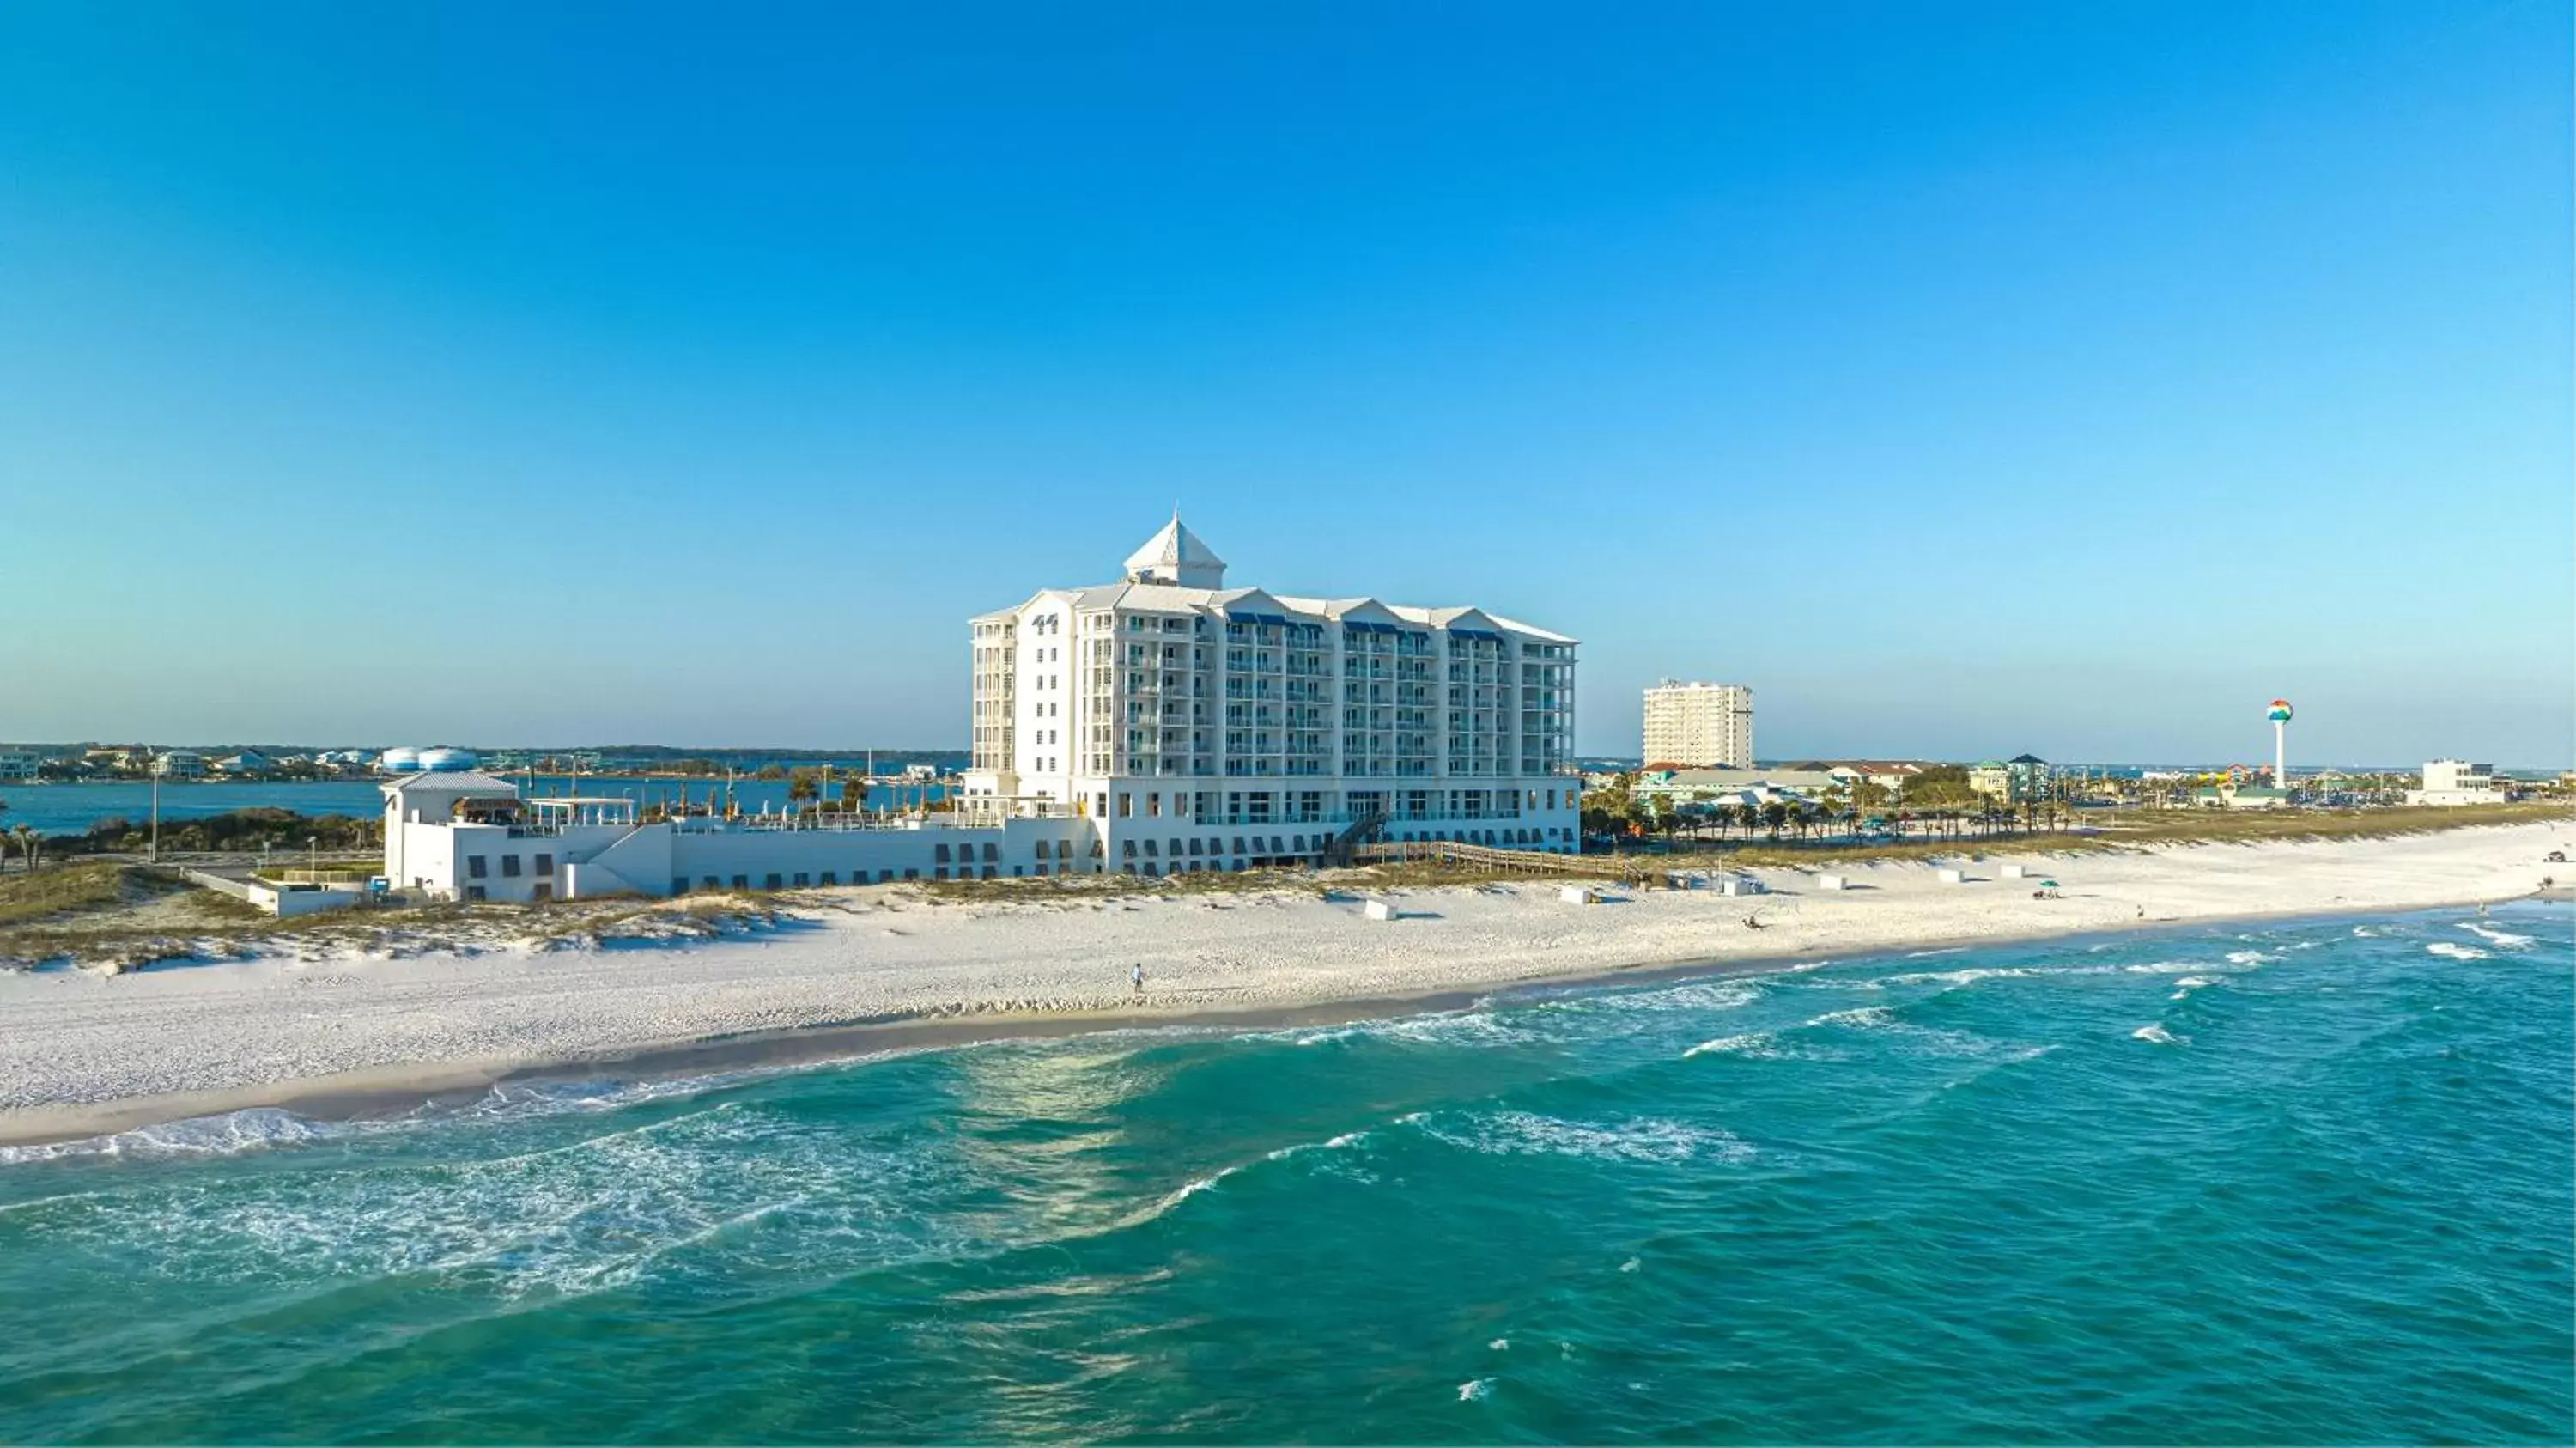 Property building in The Pensacola Beach Resort